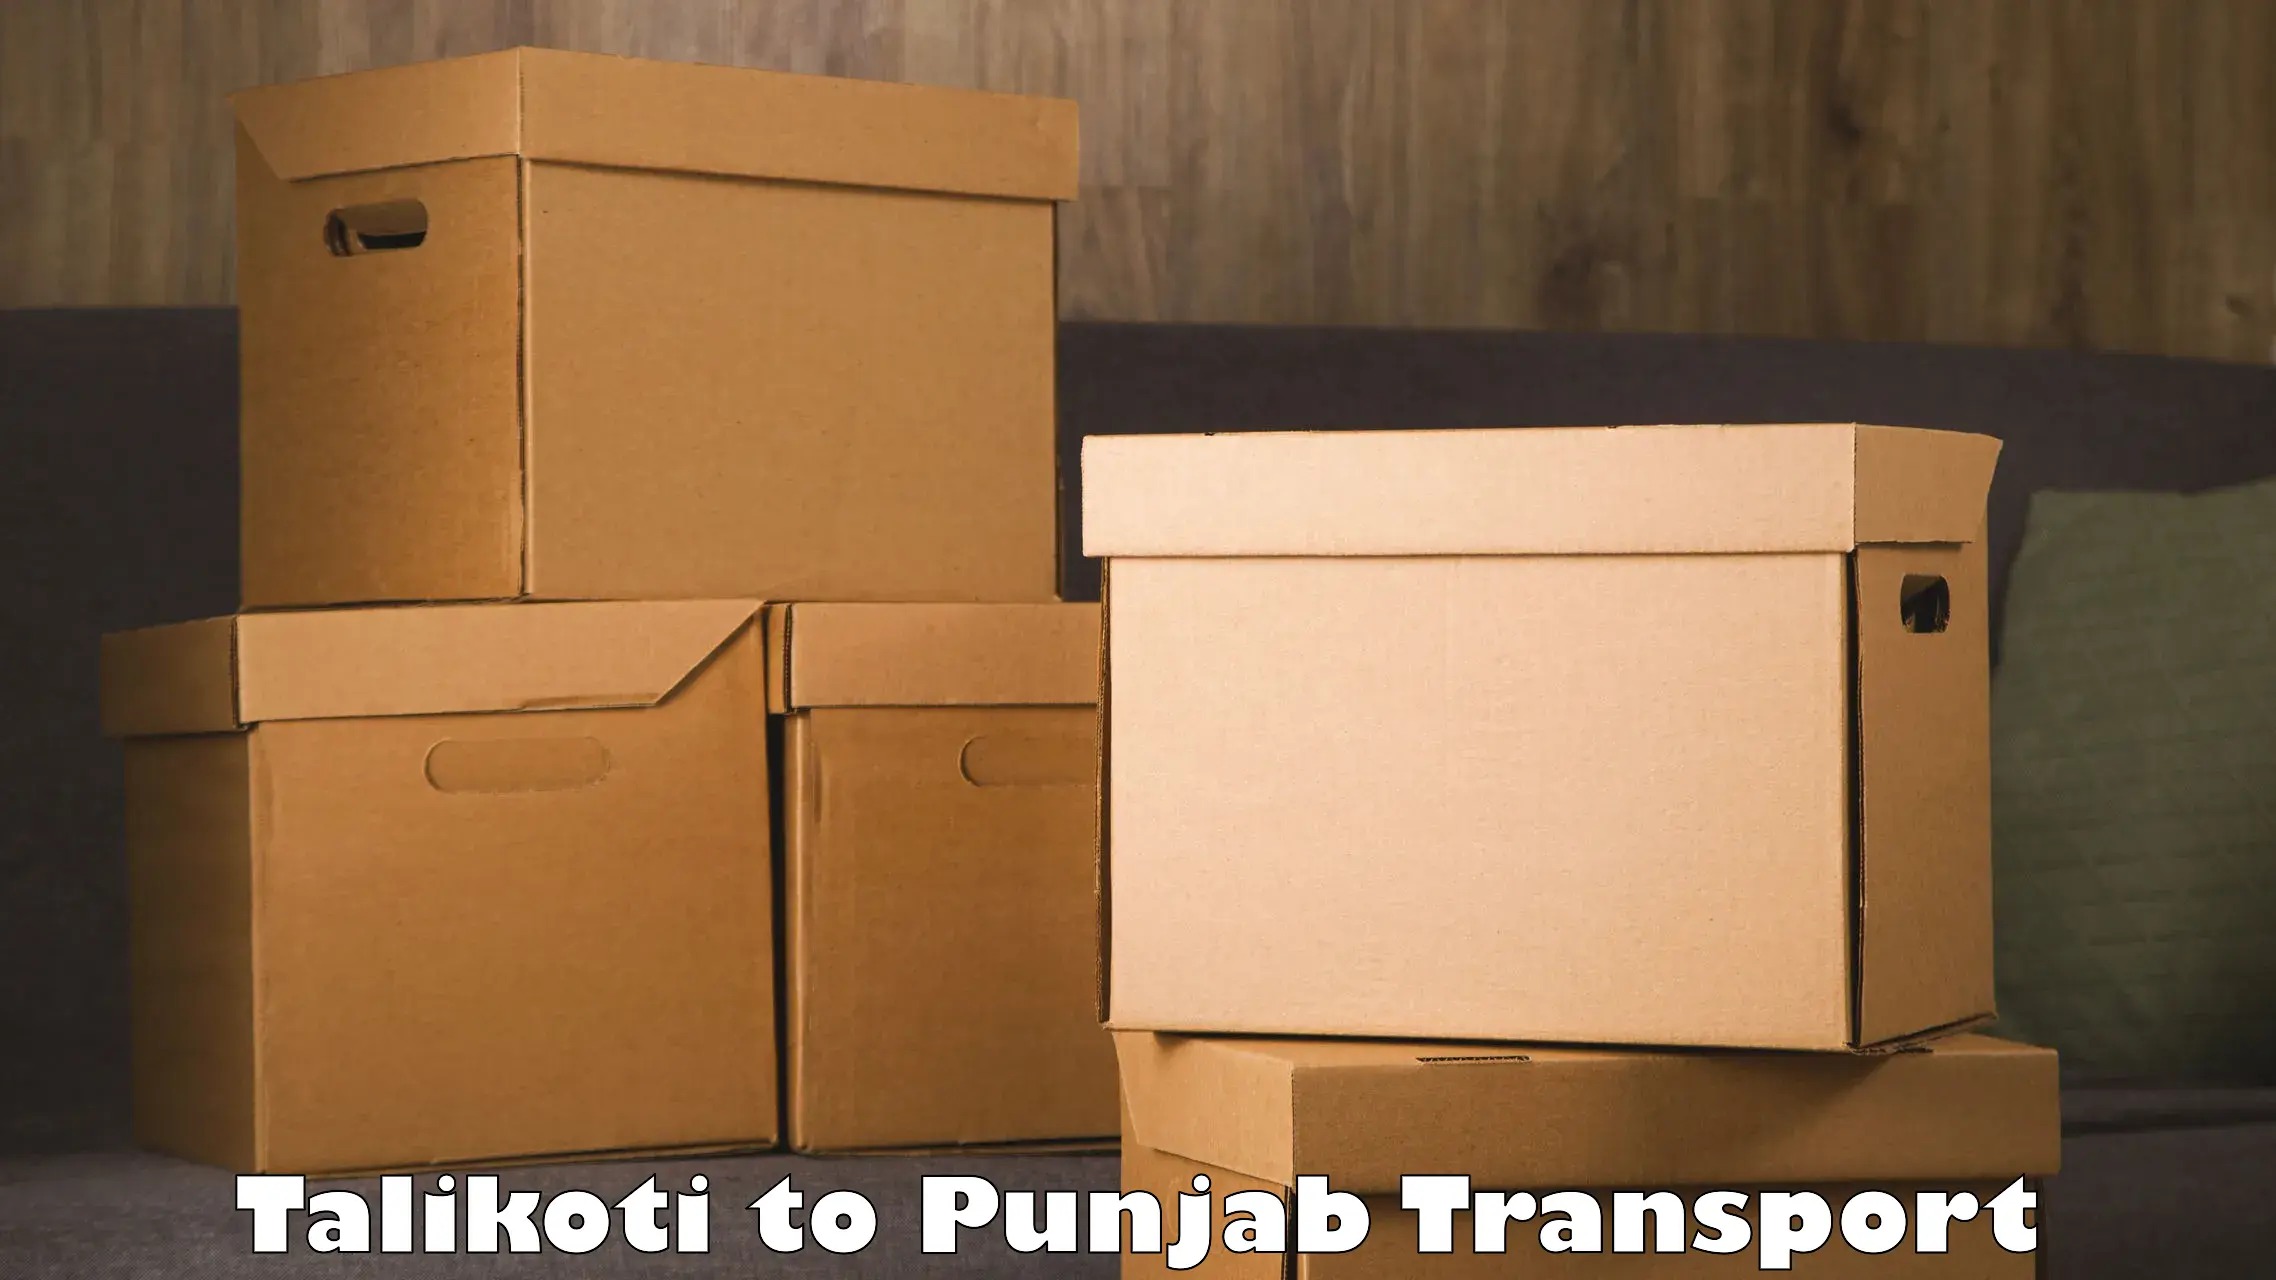 Transport bike from one state to another Talikoti to Punjab